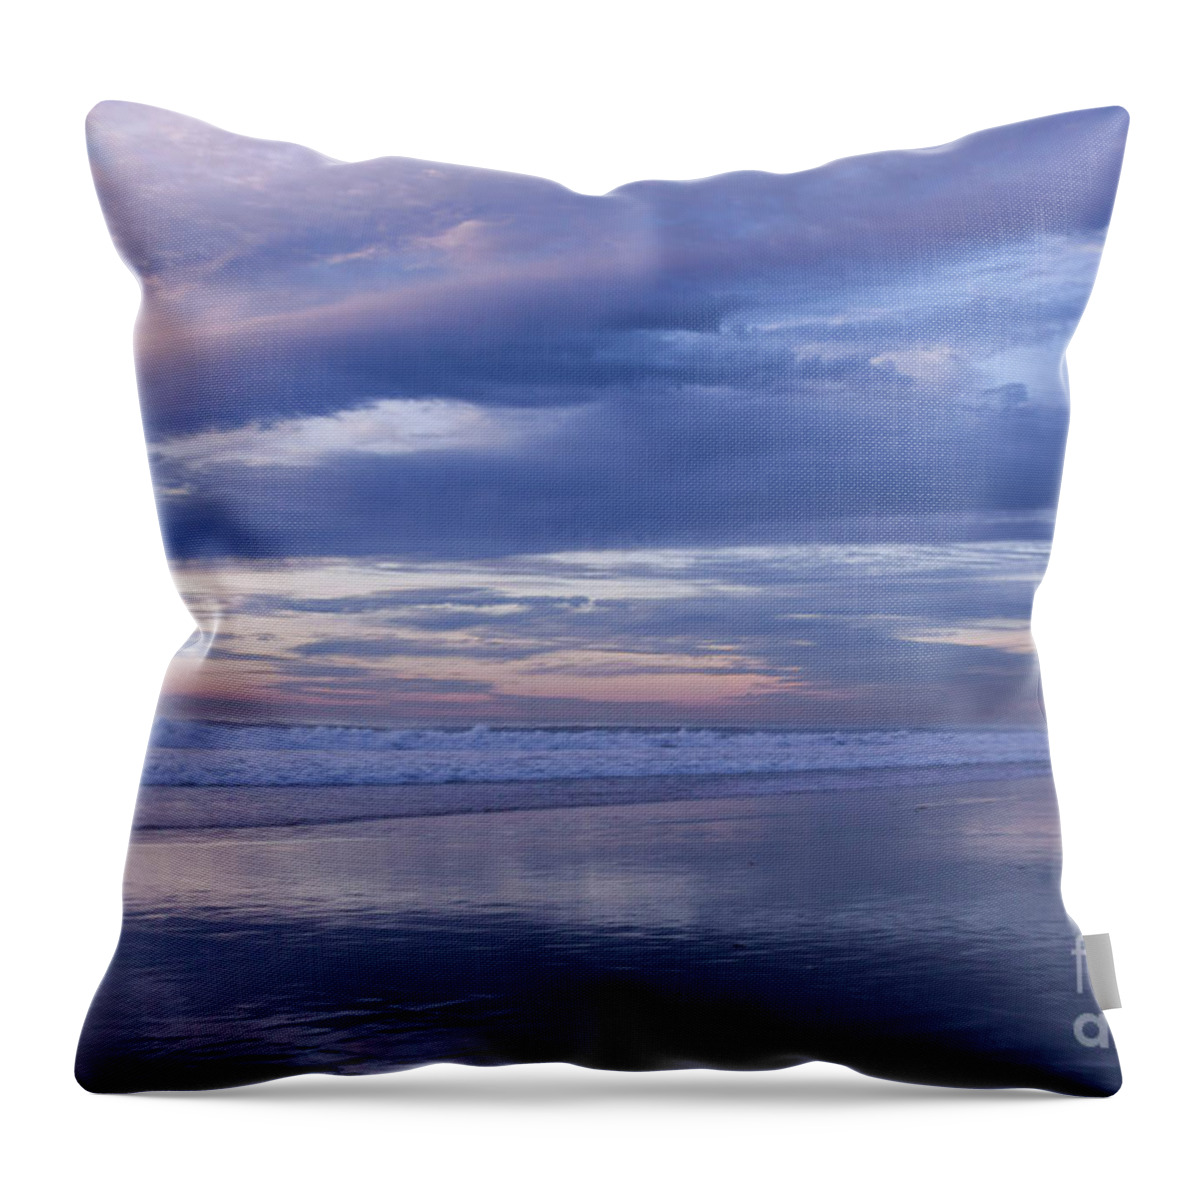 Lavender Throw Pillow featuring the photograph Like a Mirror by Ana V Ramirez